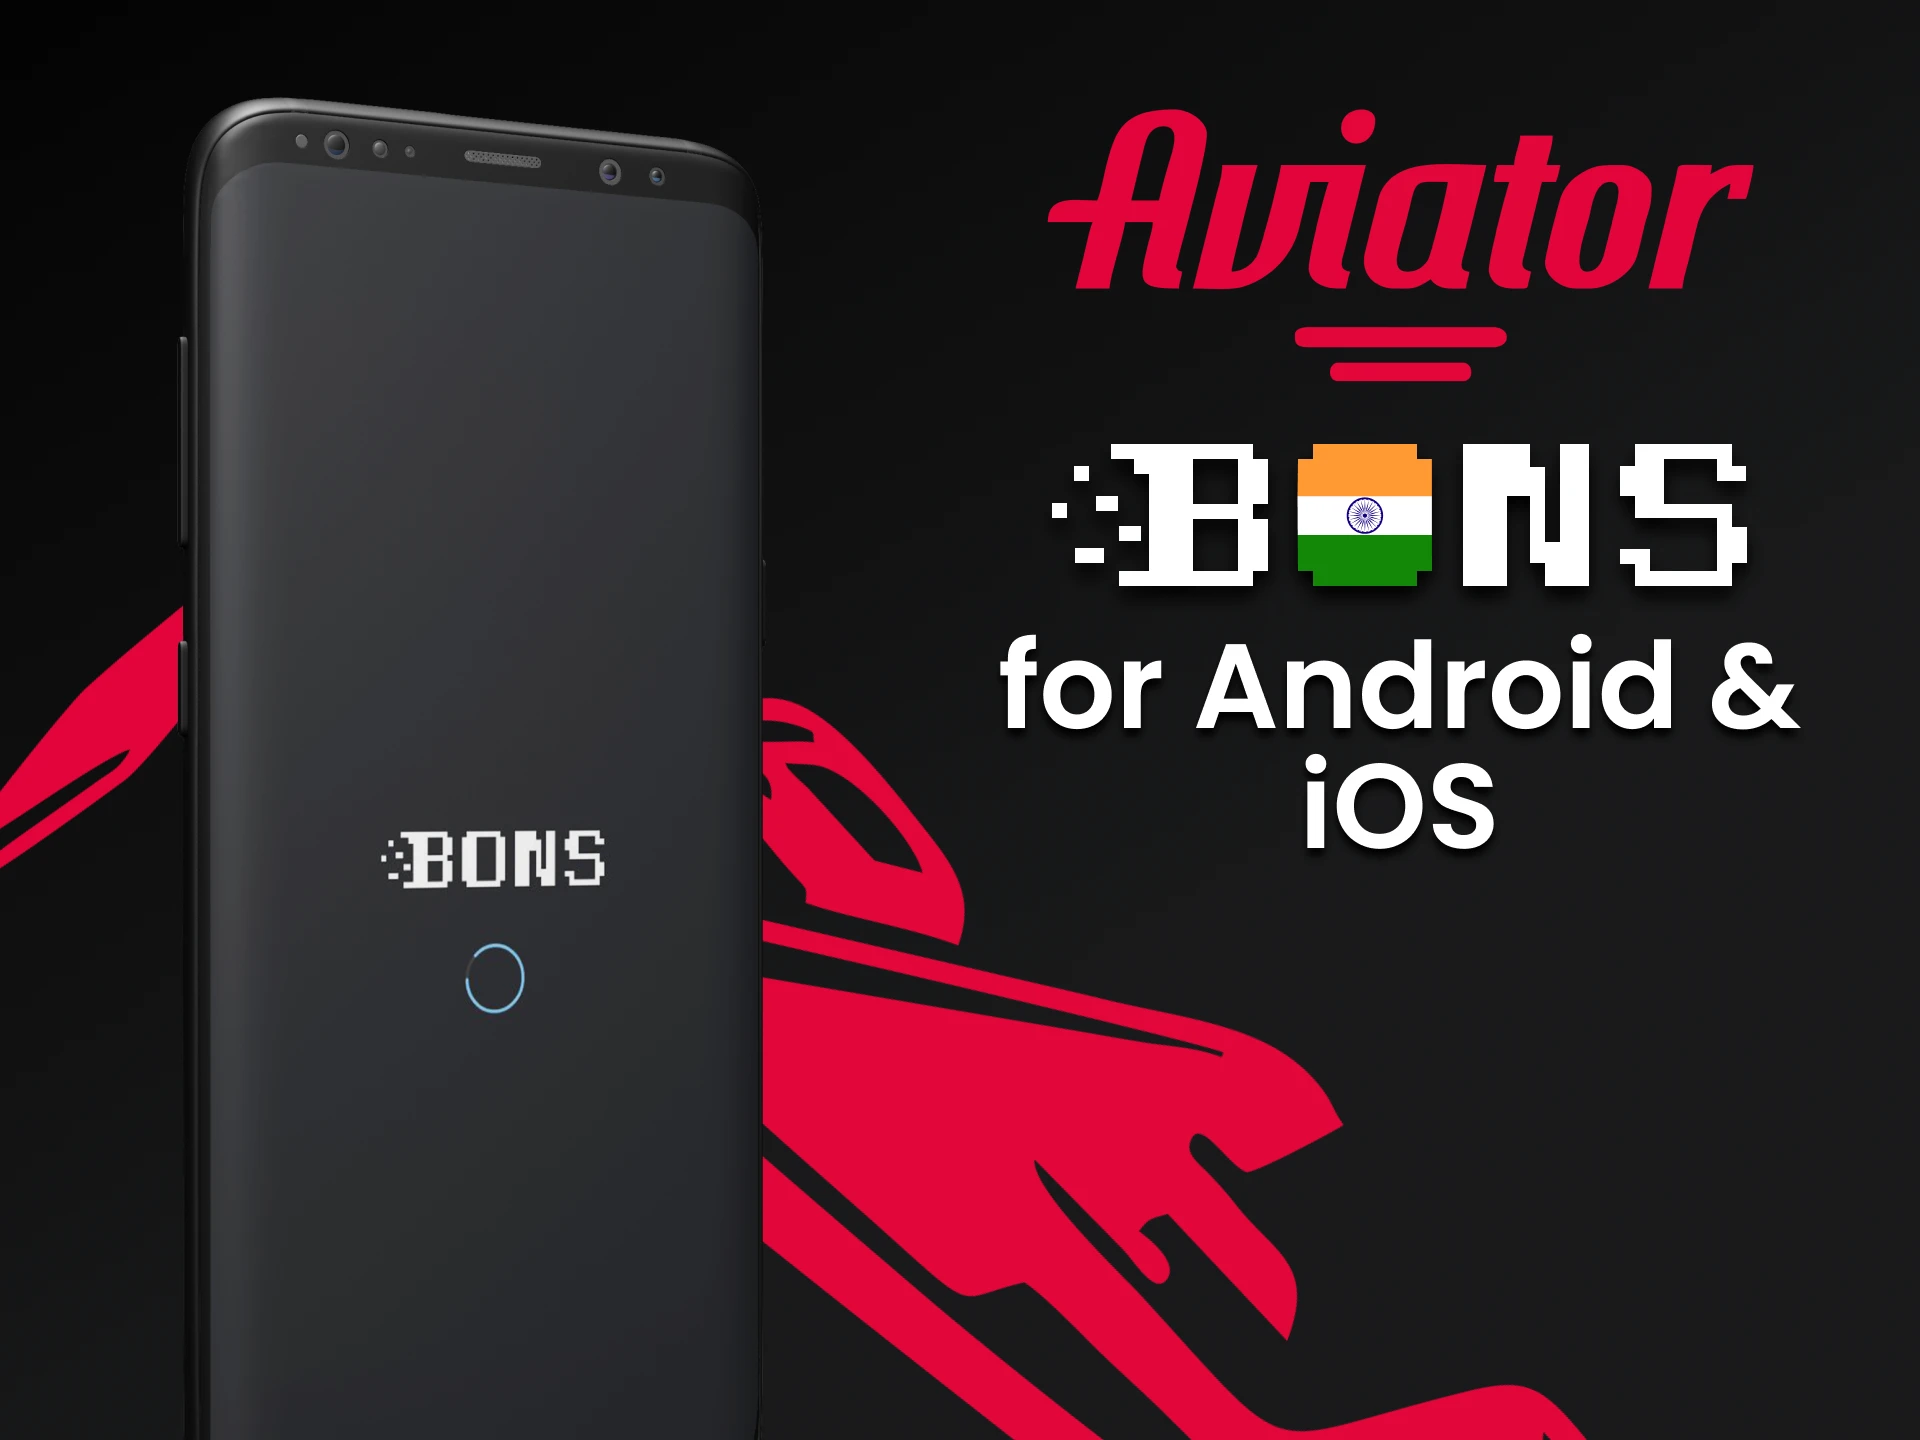 Play the Bons app for smartphones in Aviator.